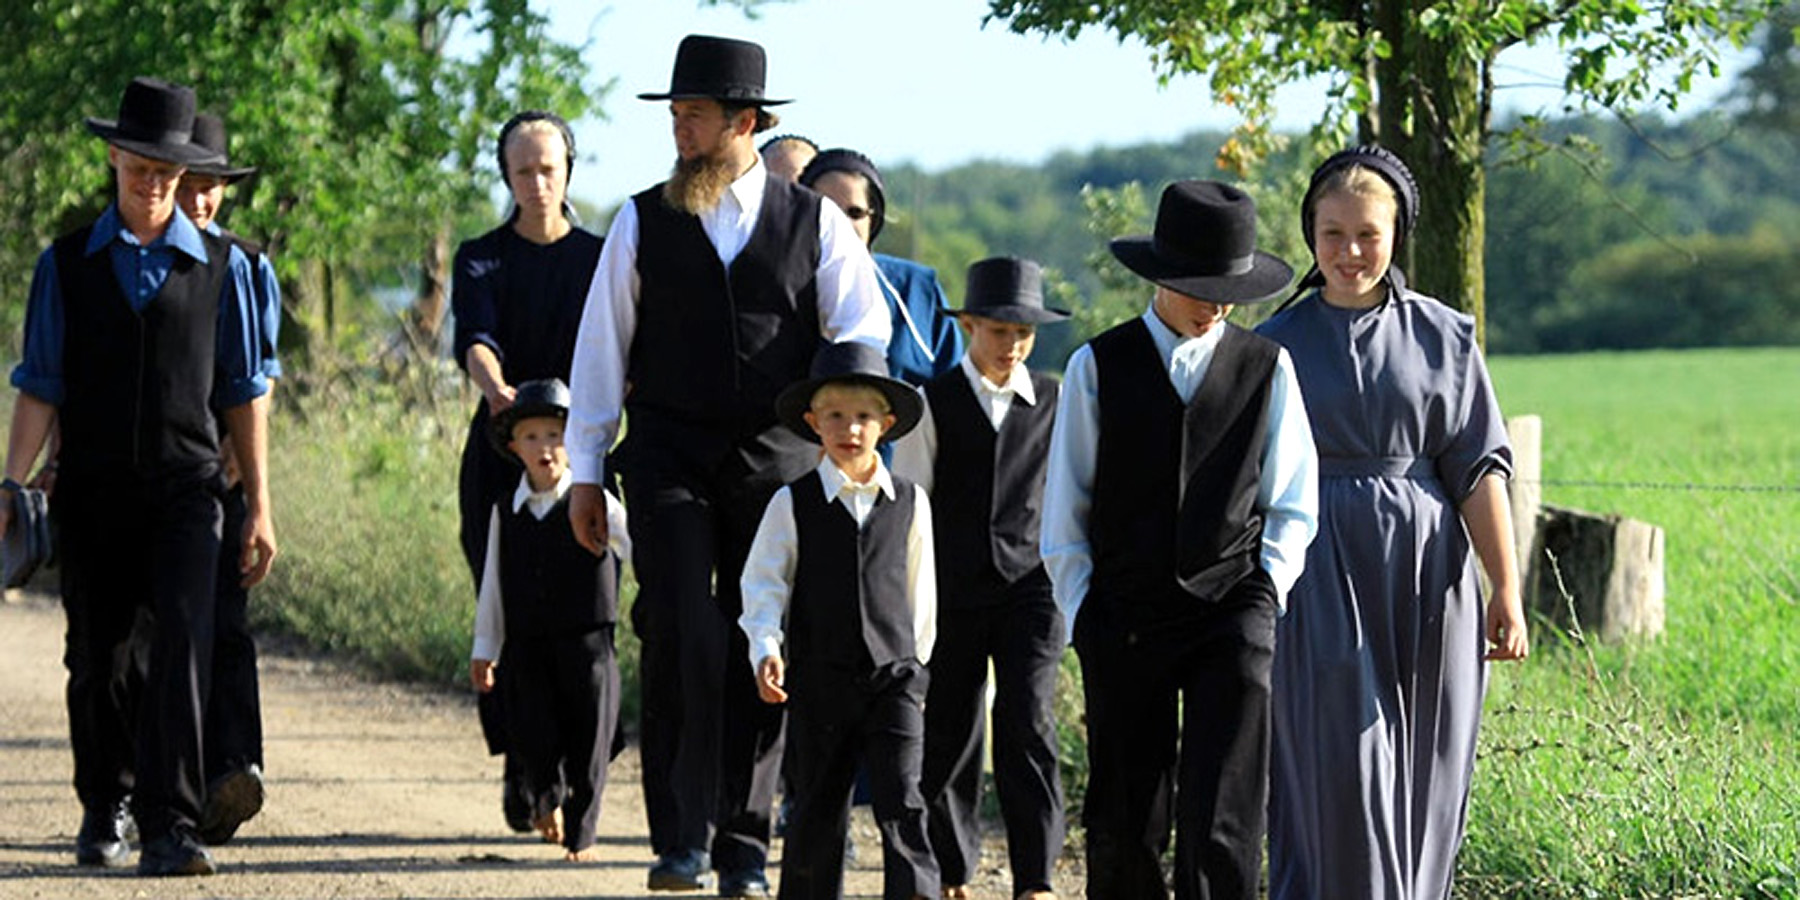 Image result for amish culture, beliefs and lifestyle